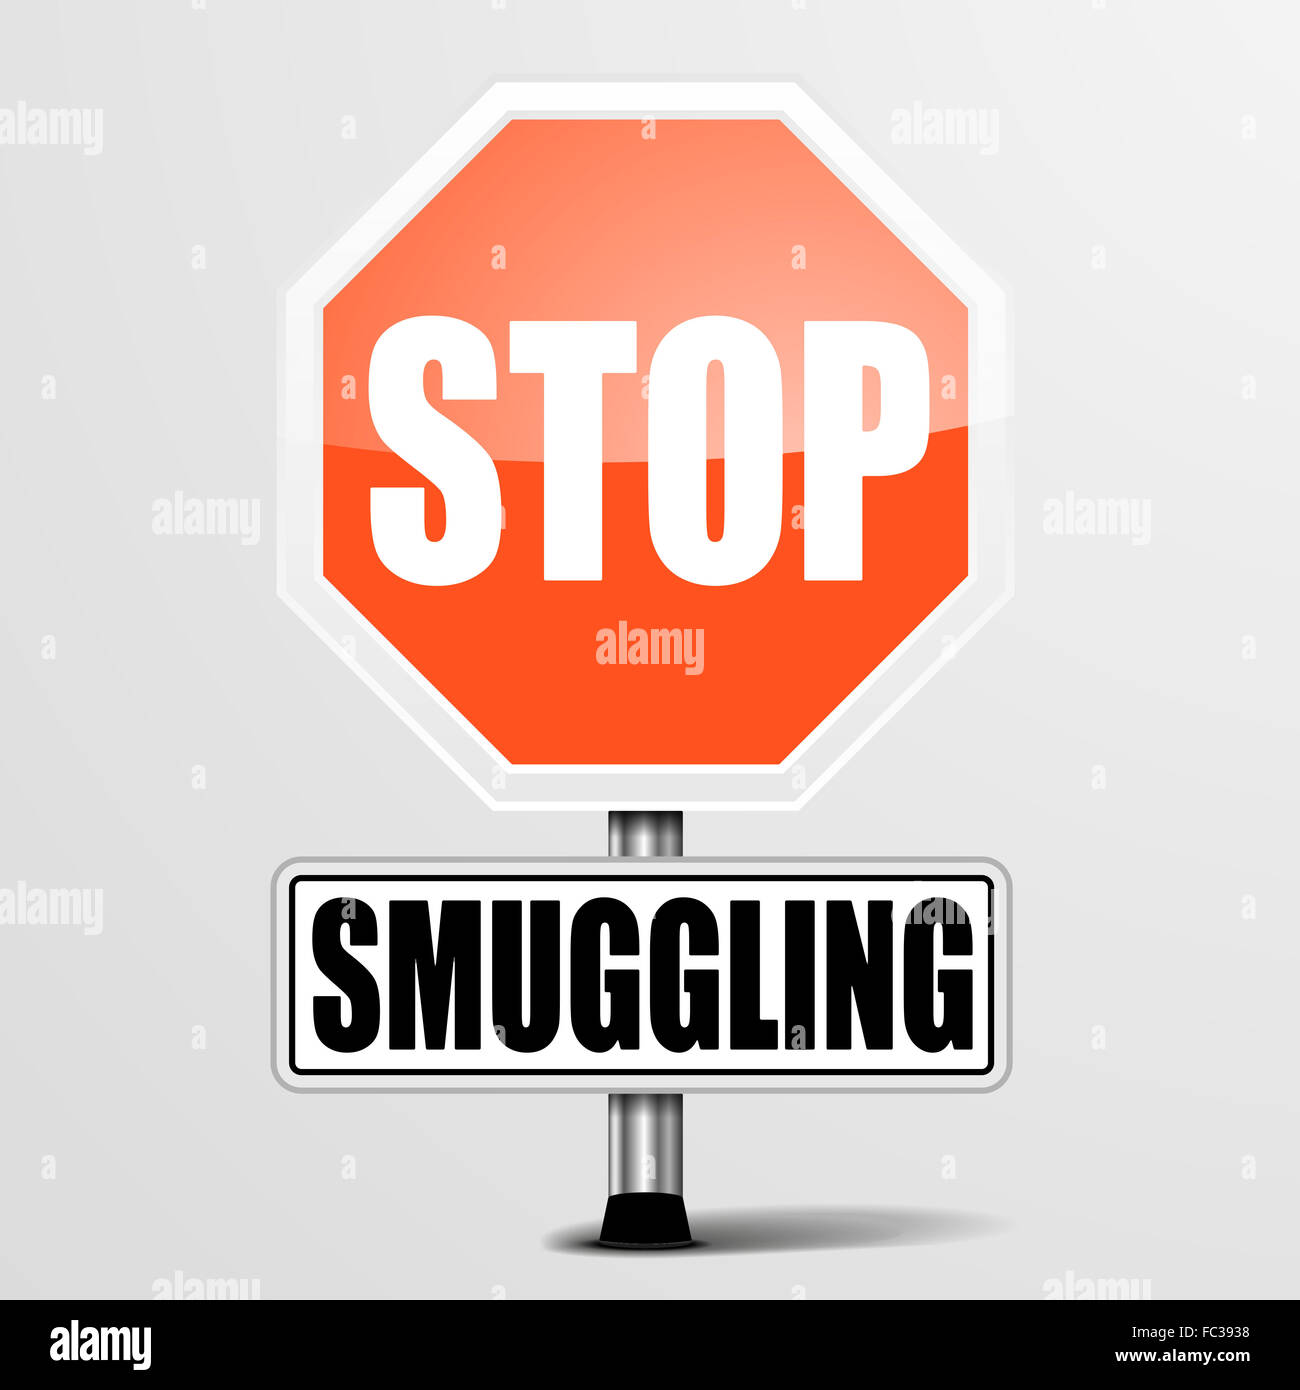 Stop Smuggling Stock Photo